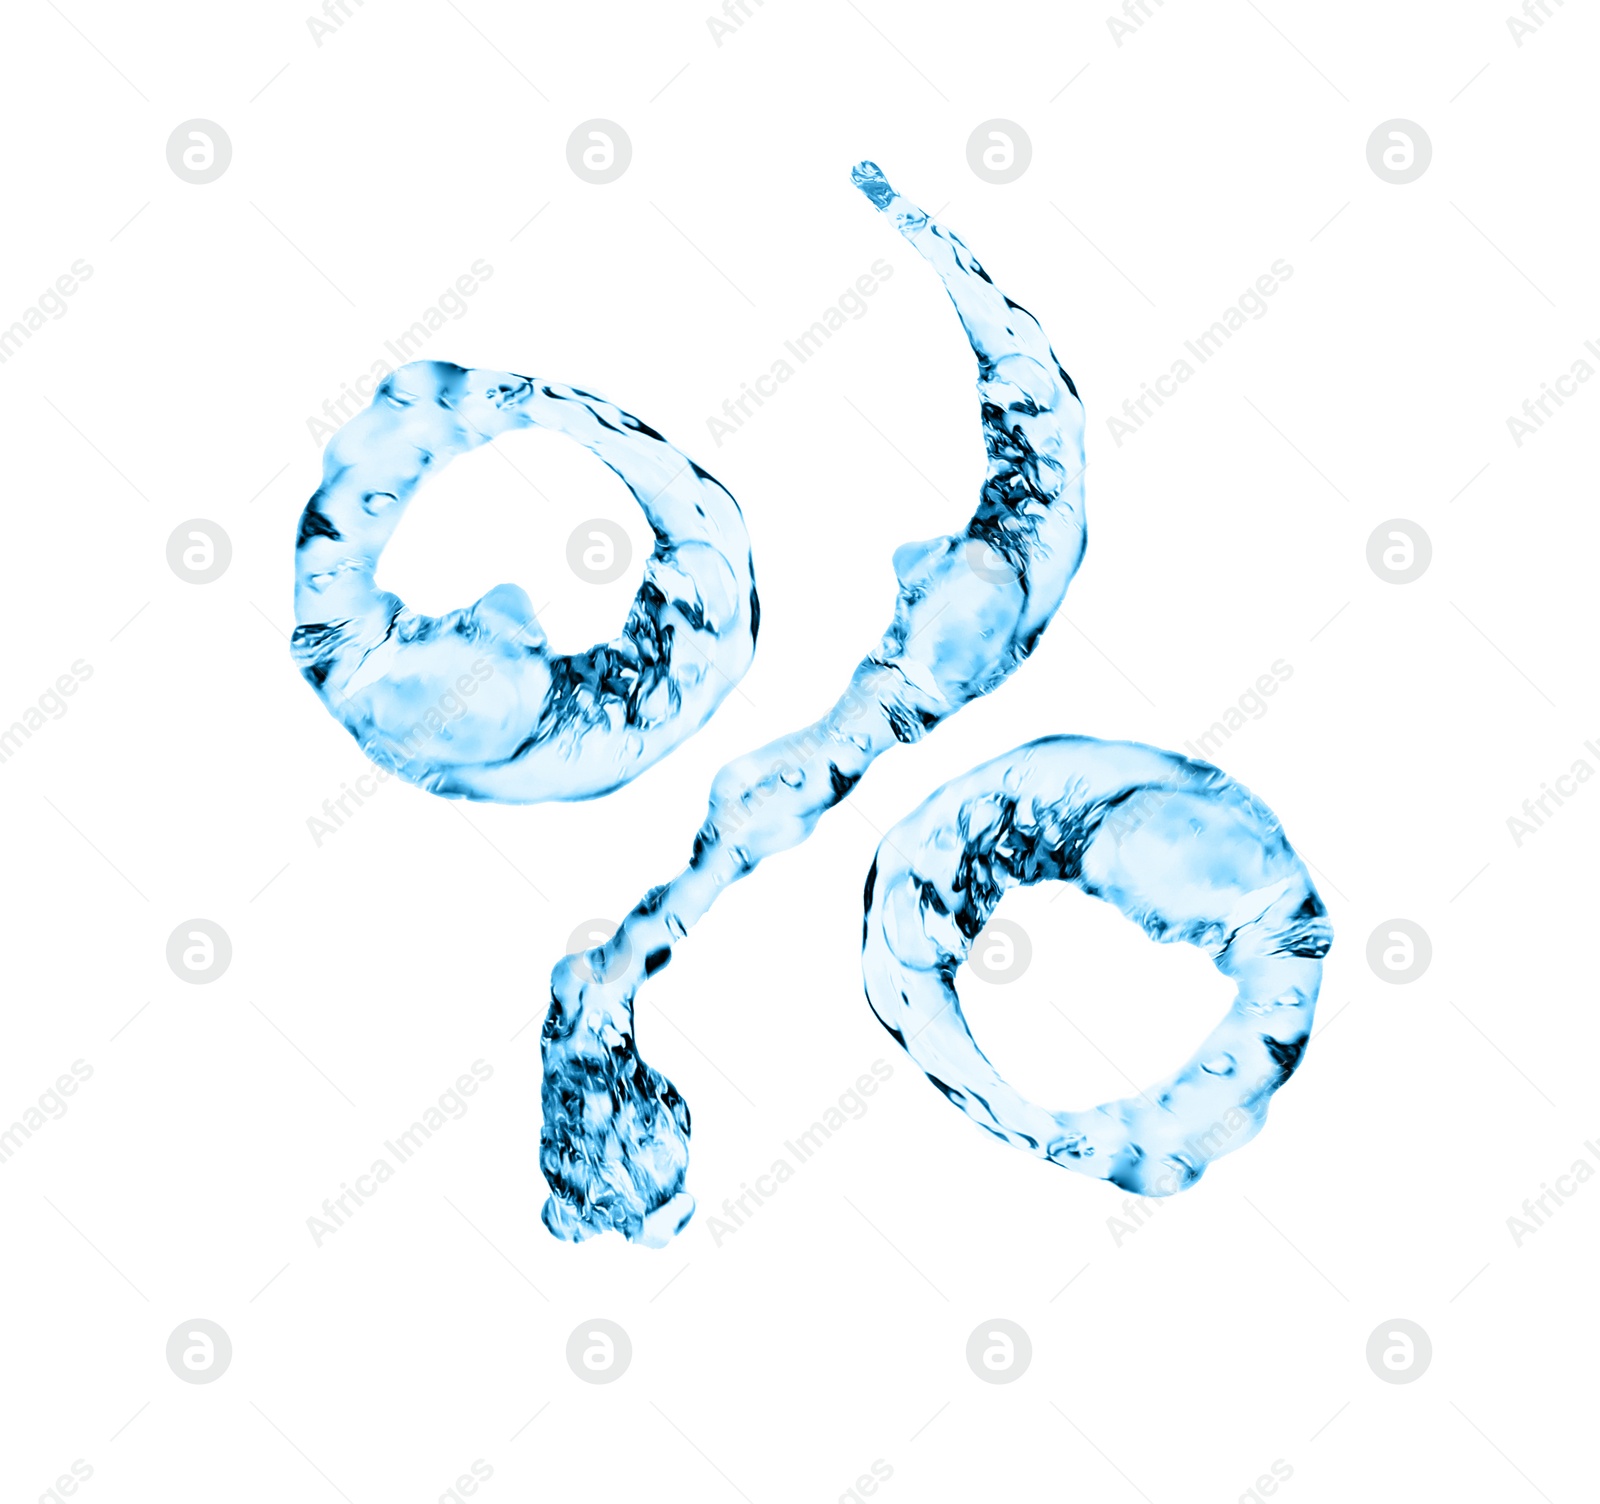 Illustration of Percent sign made of water on white background